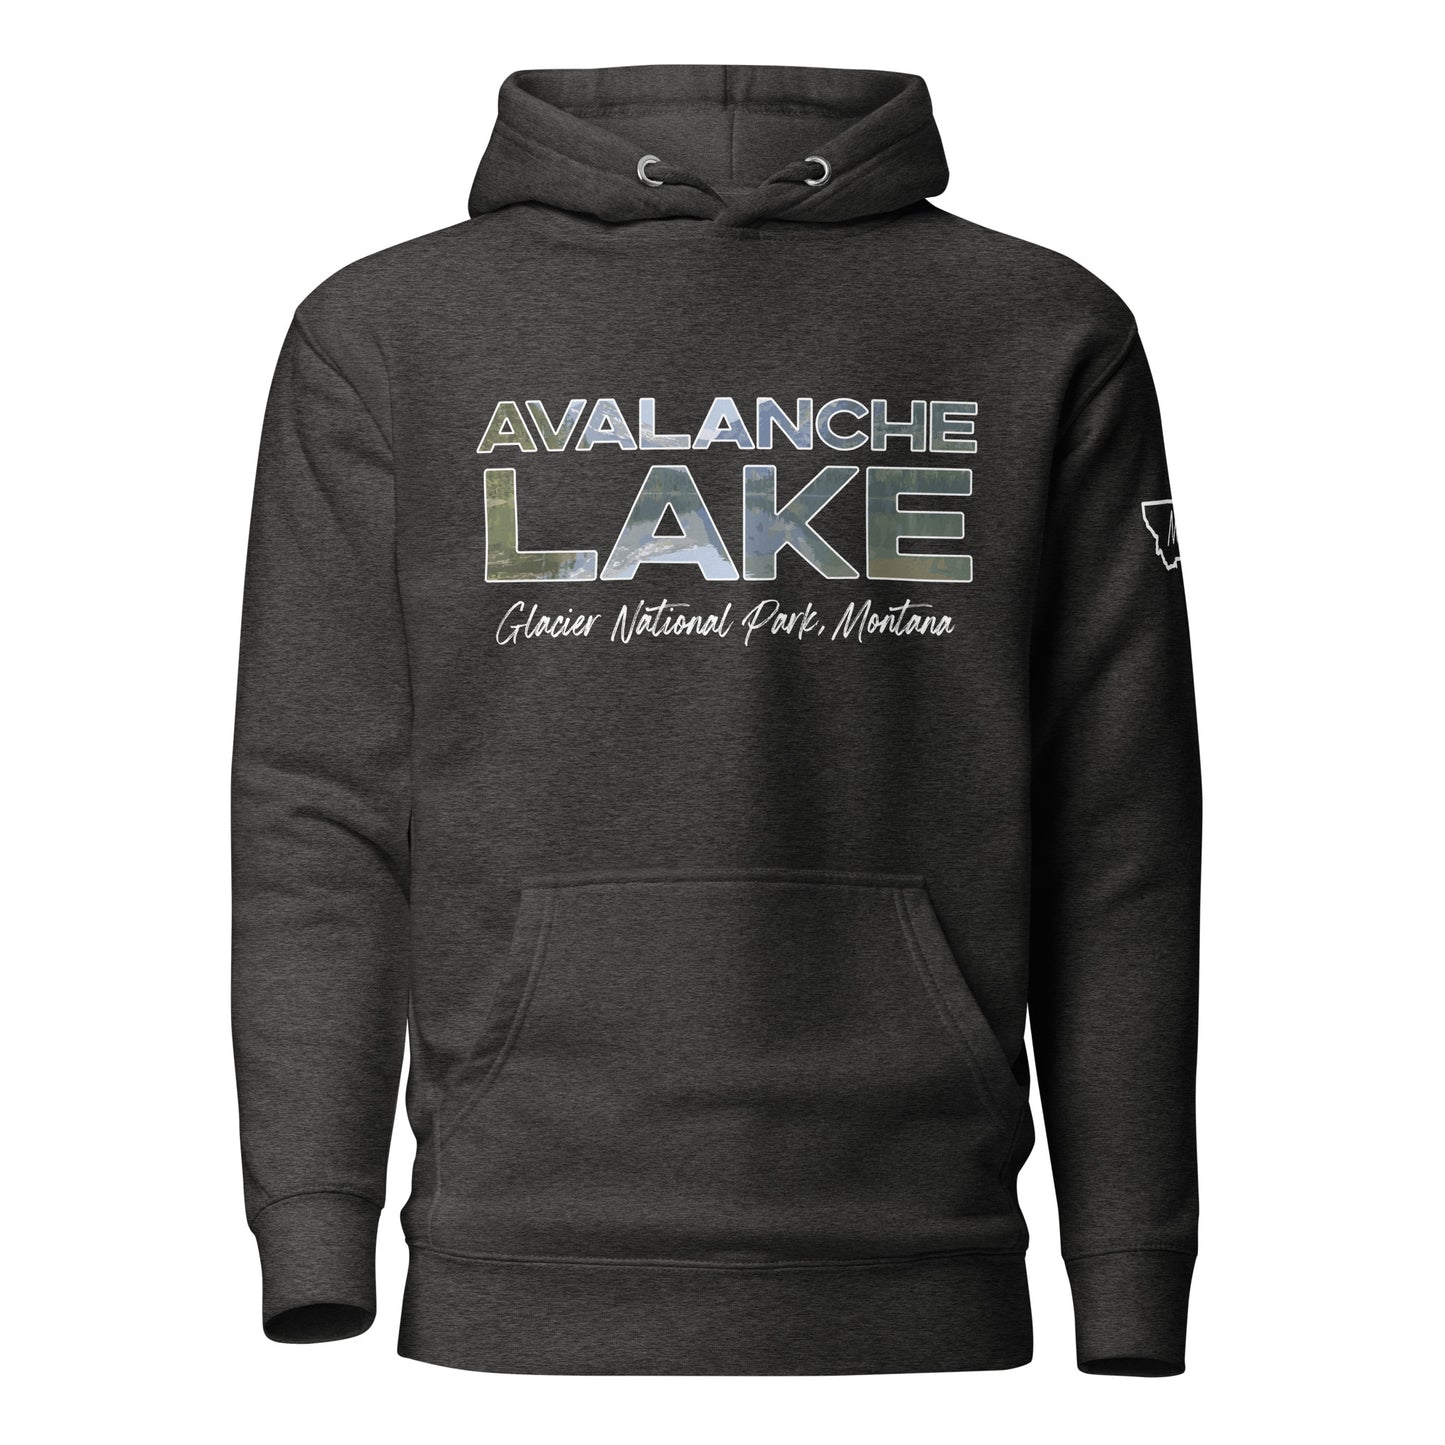 Front view of Avalanche Lake in Glacier National Park Montana Charcoal Heather Hoodie from Park Attire